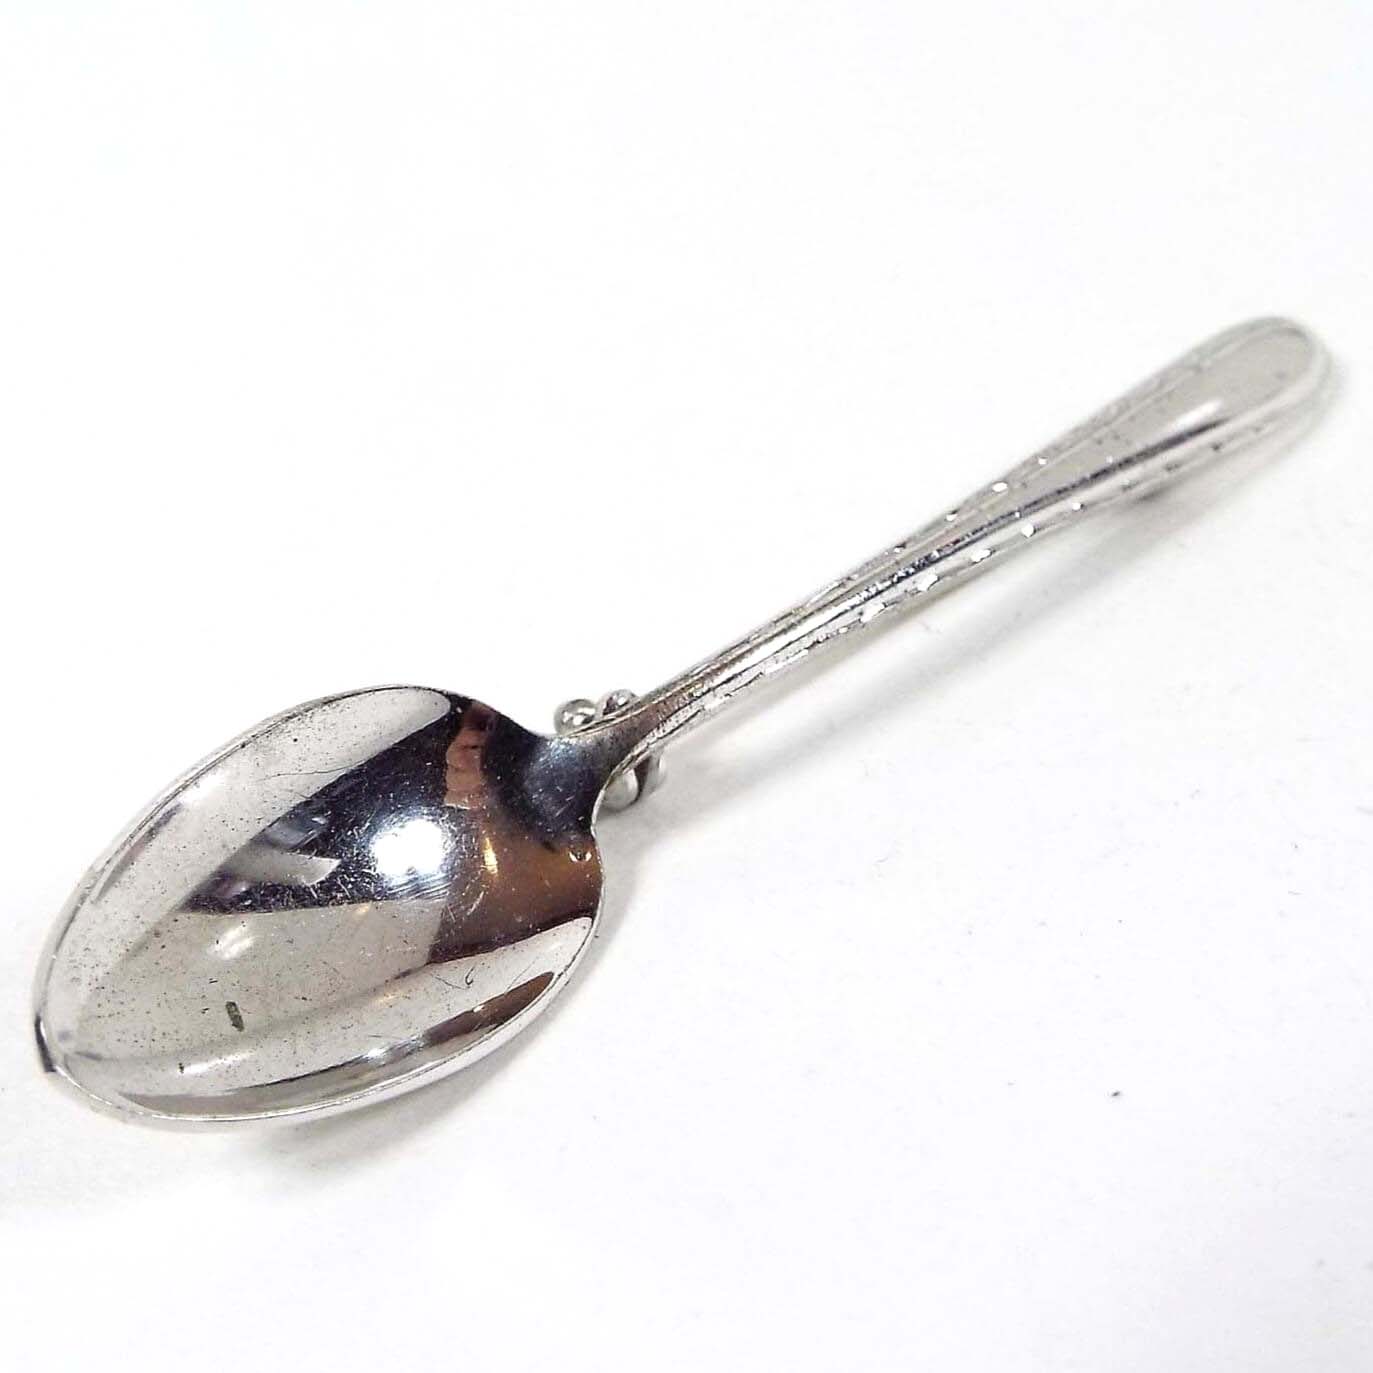 Top view of the 1940's Mid Century vintage spoon brooch pin. It is silver tone in color and shaped like a small spoon.